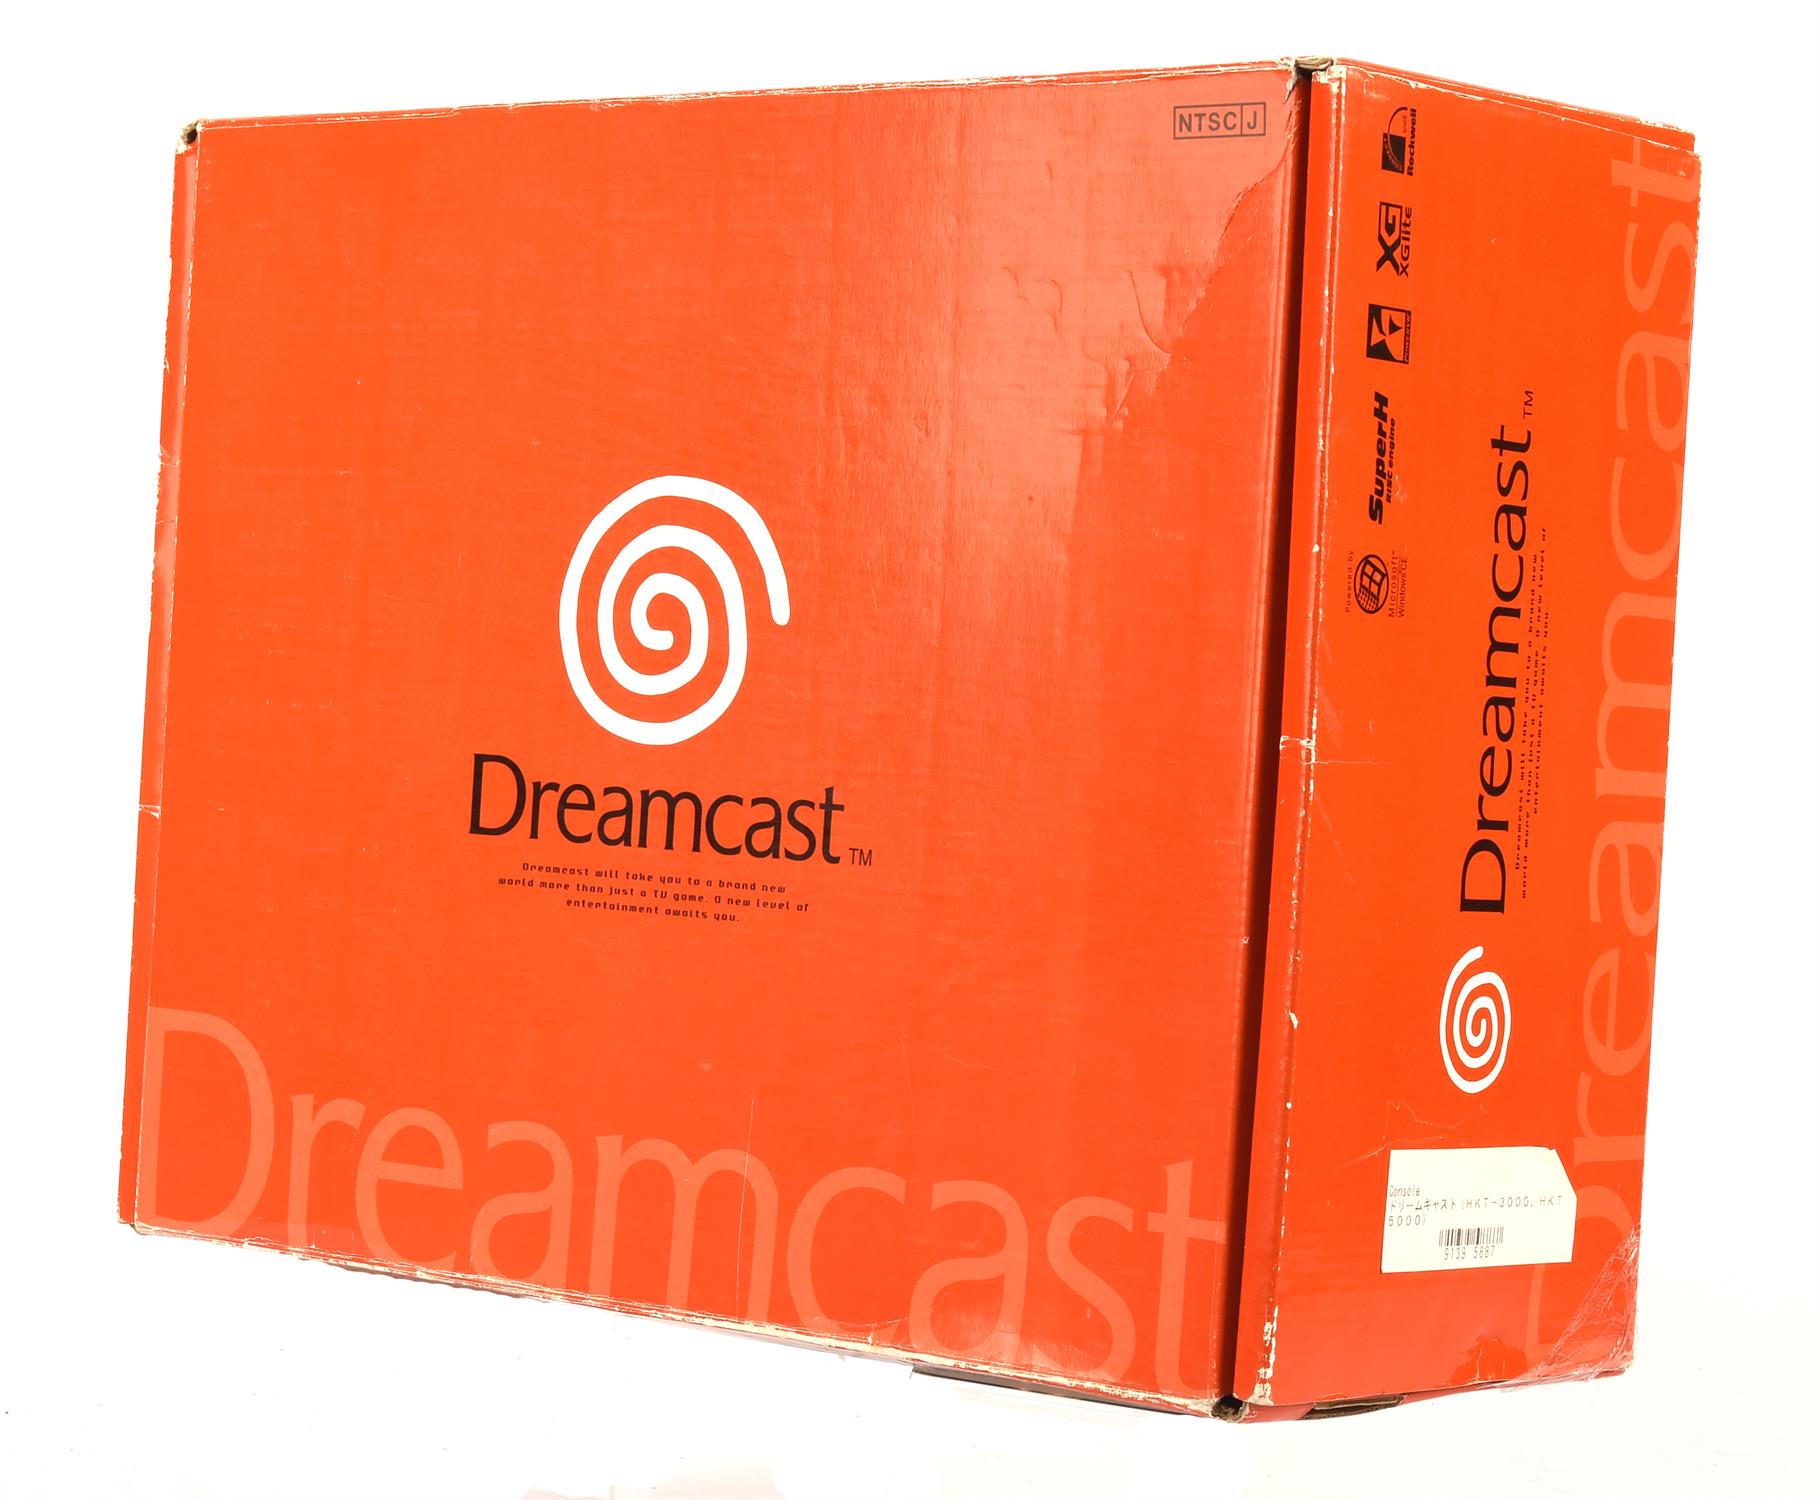 Japanese Sega Dreamcast console, complete and boxed (NTSC-J) Console comes with 1 controller, - Image 3 of 4